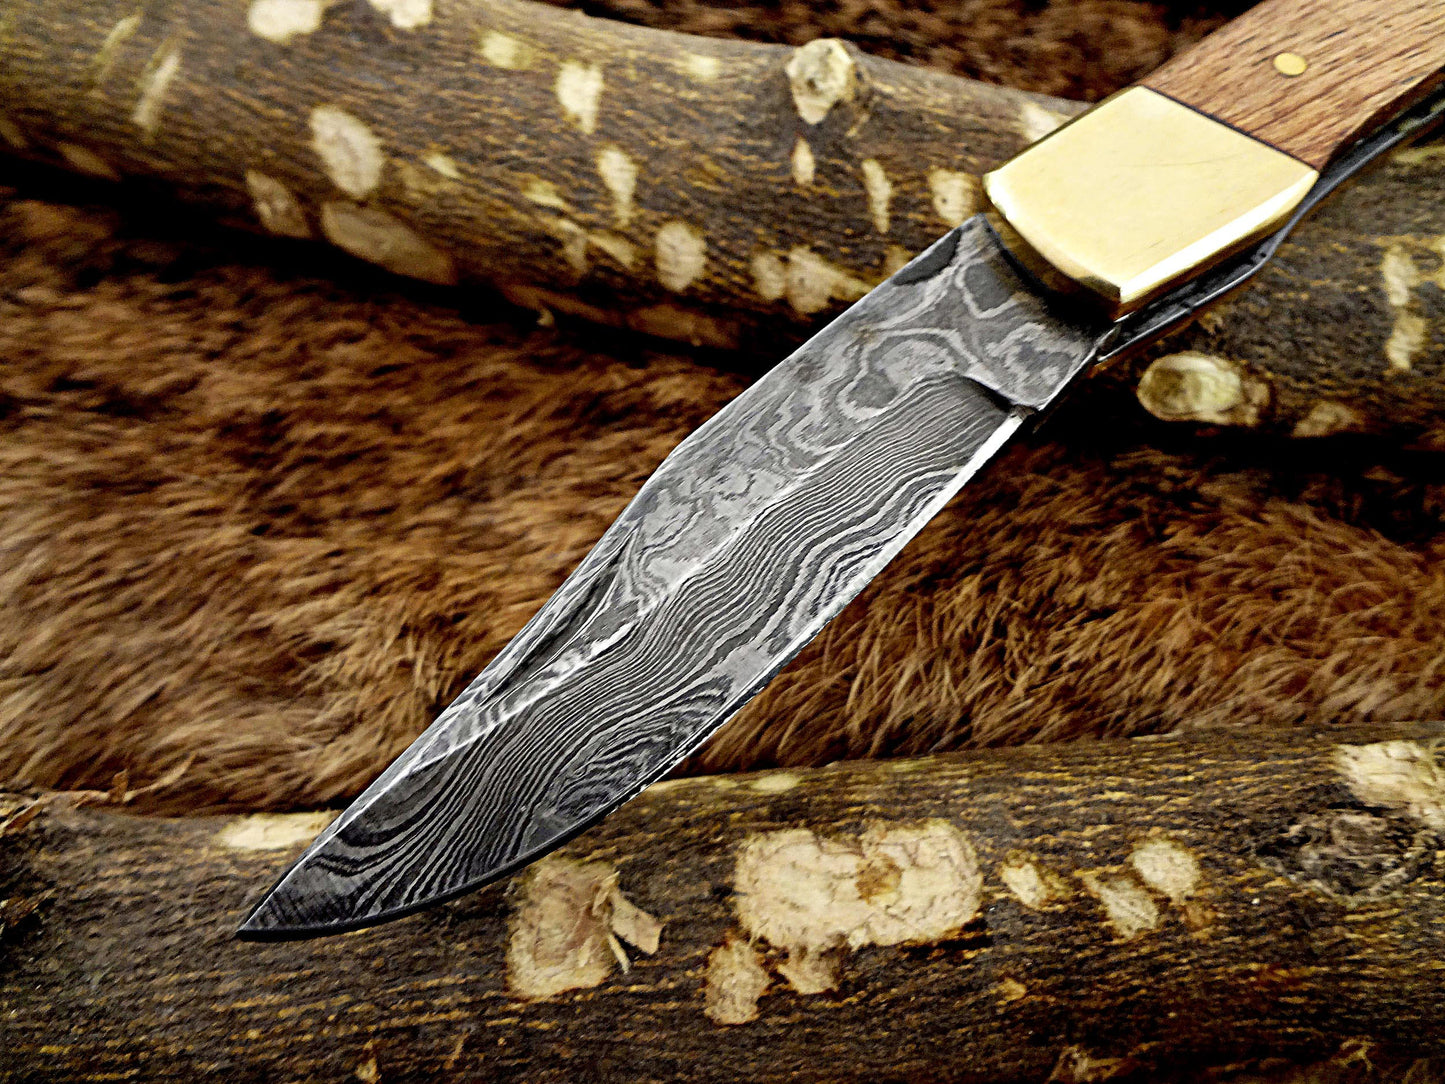 7.5" back liver lock Folding Knife, Hand forged Damascus steel blade, Available in wood, Bone and Horn scales bolster, Comes with cow hide leather sheath